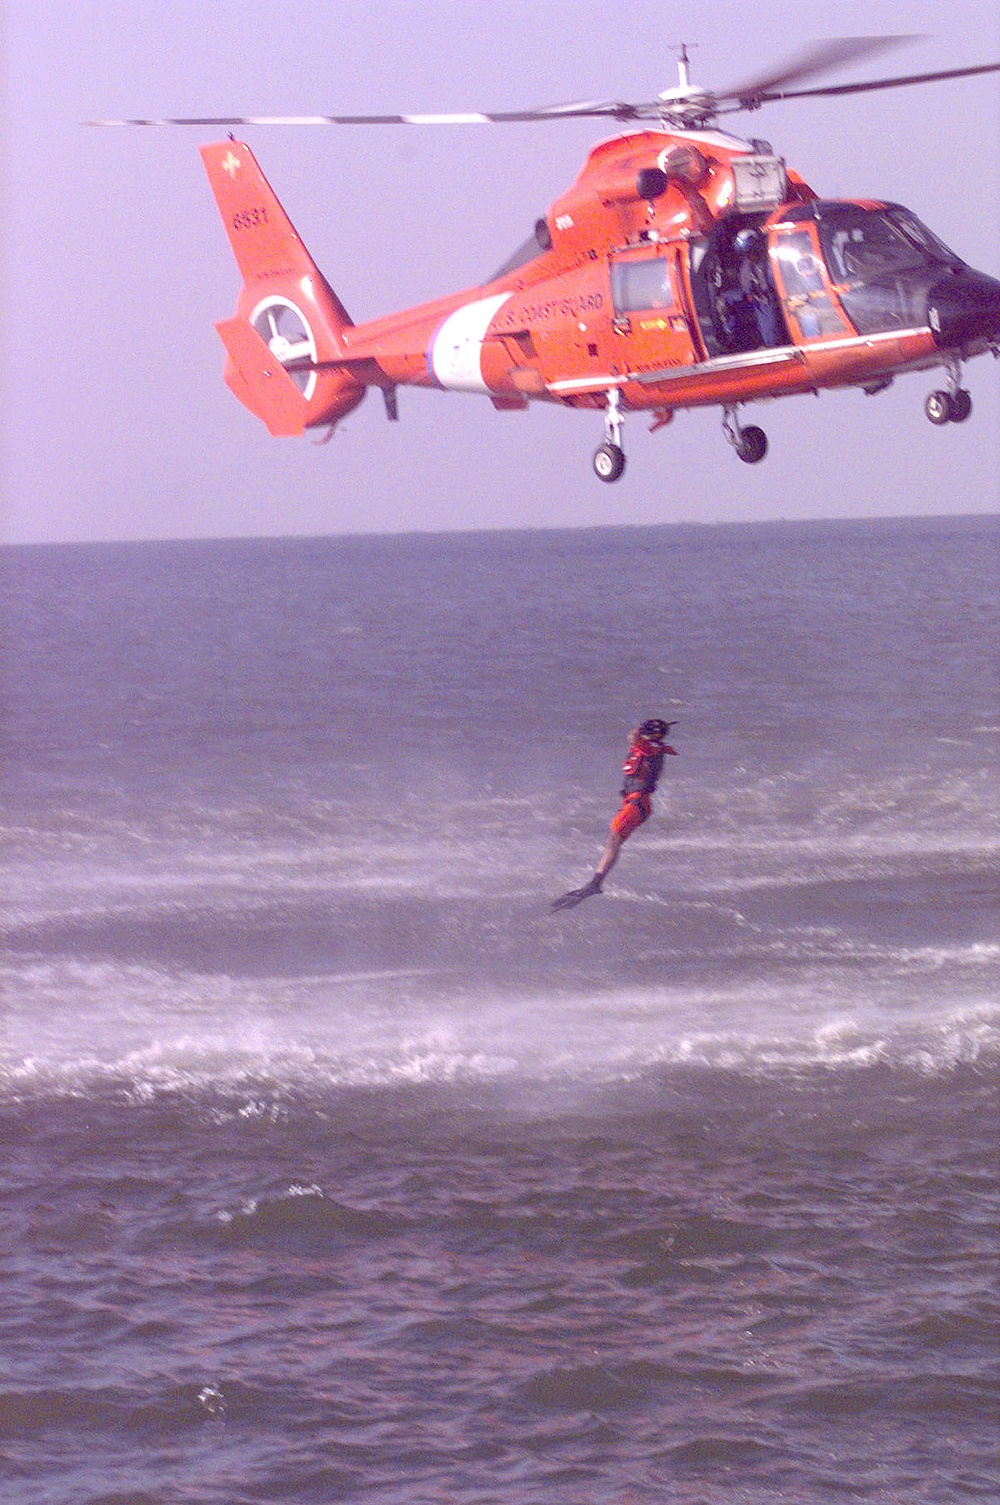 Search and rescue drills